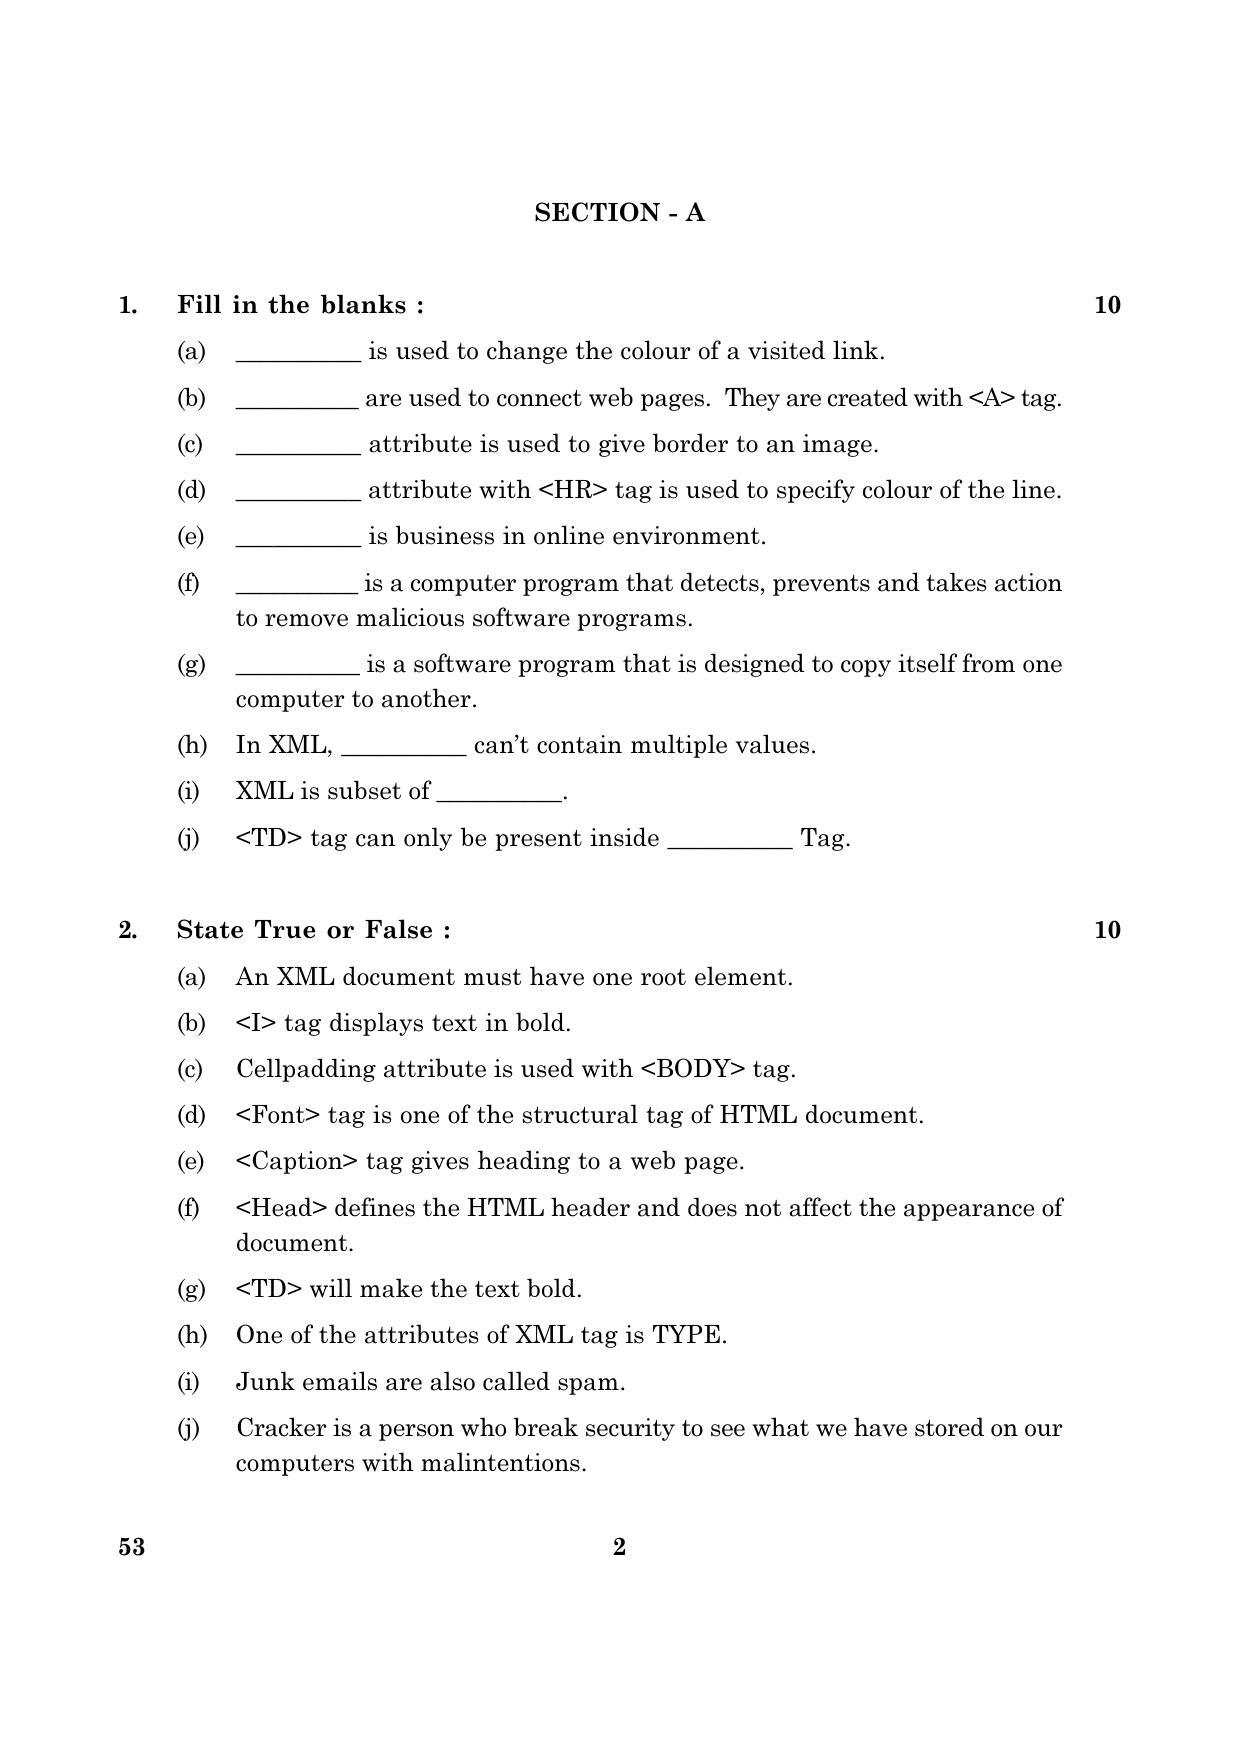 CBSE Class 10 053 Foundation Of Information Technology 2016 Question Paper - Page 2